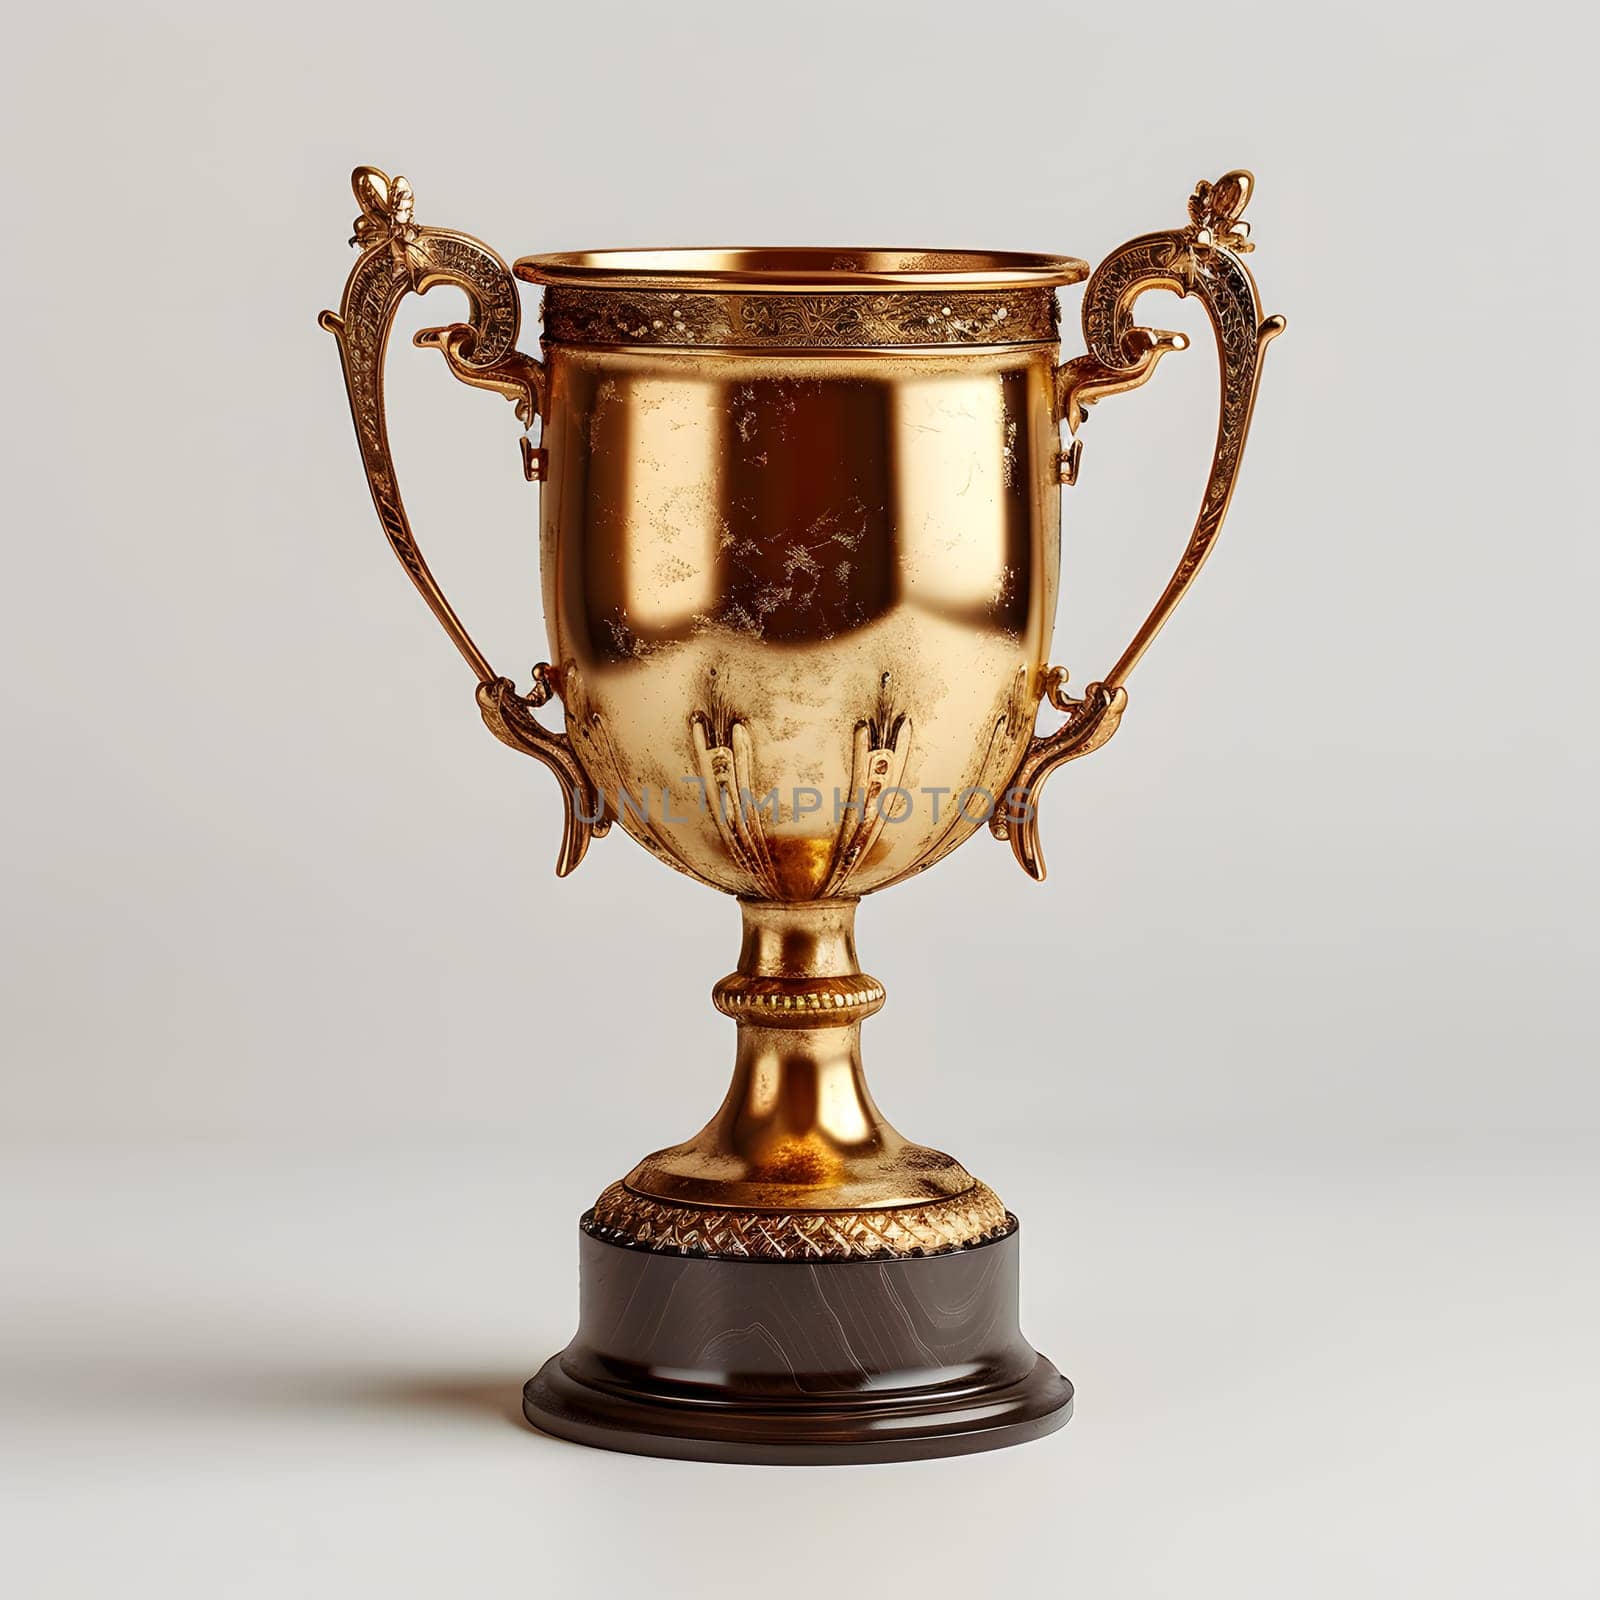 An elegant gold trophy rests on a clean white surface, showcasing its intricate design and craftsmanship as a stunning piece of art and fashion accessory